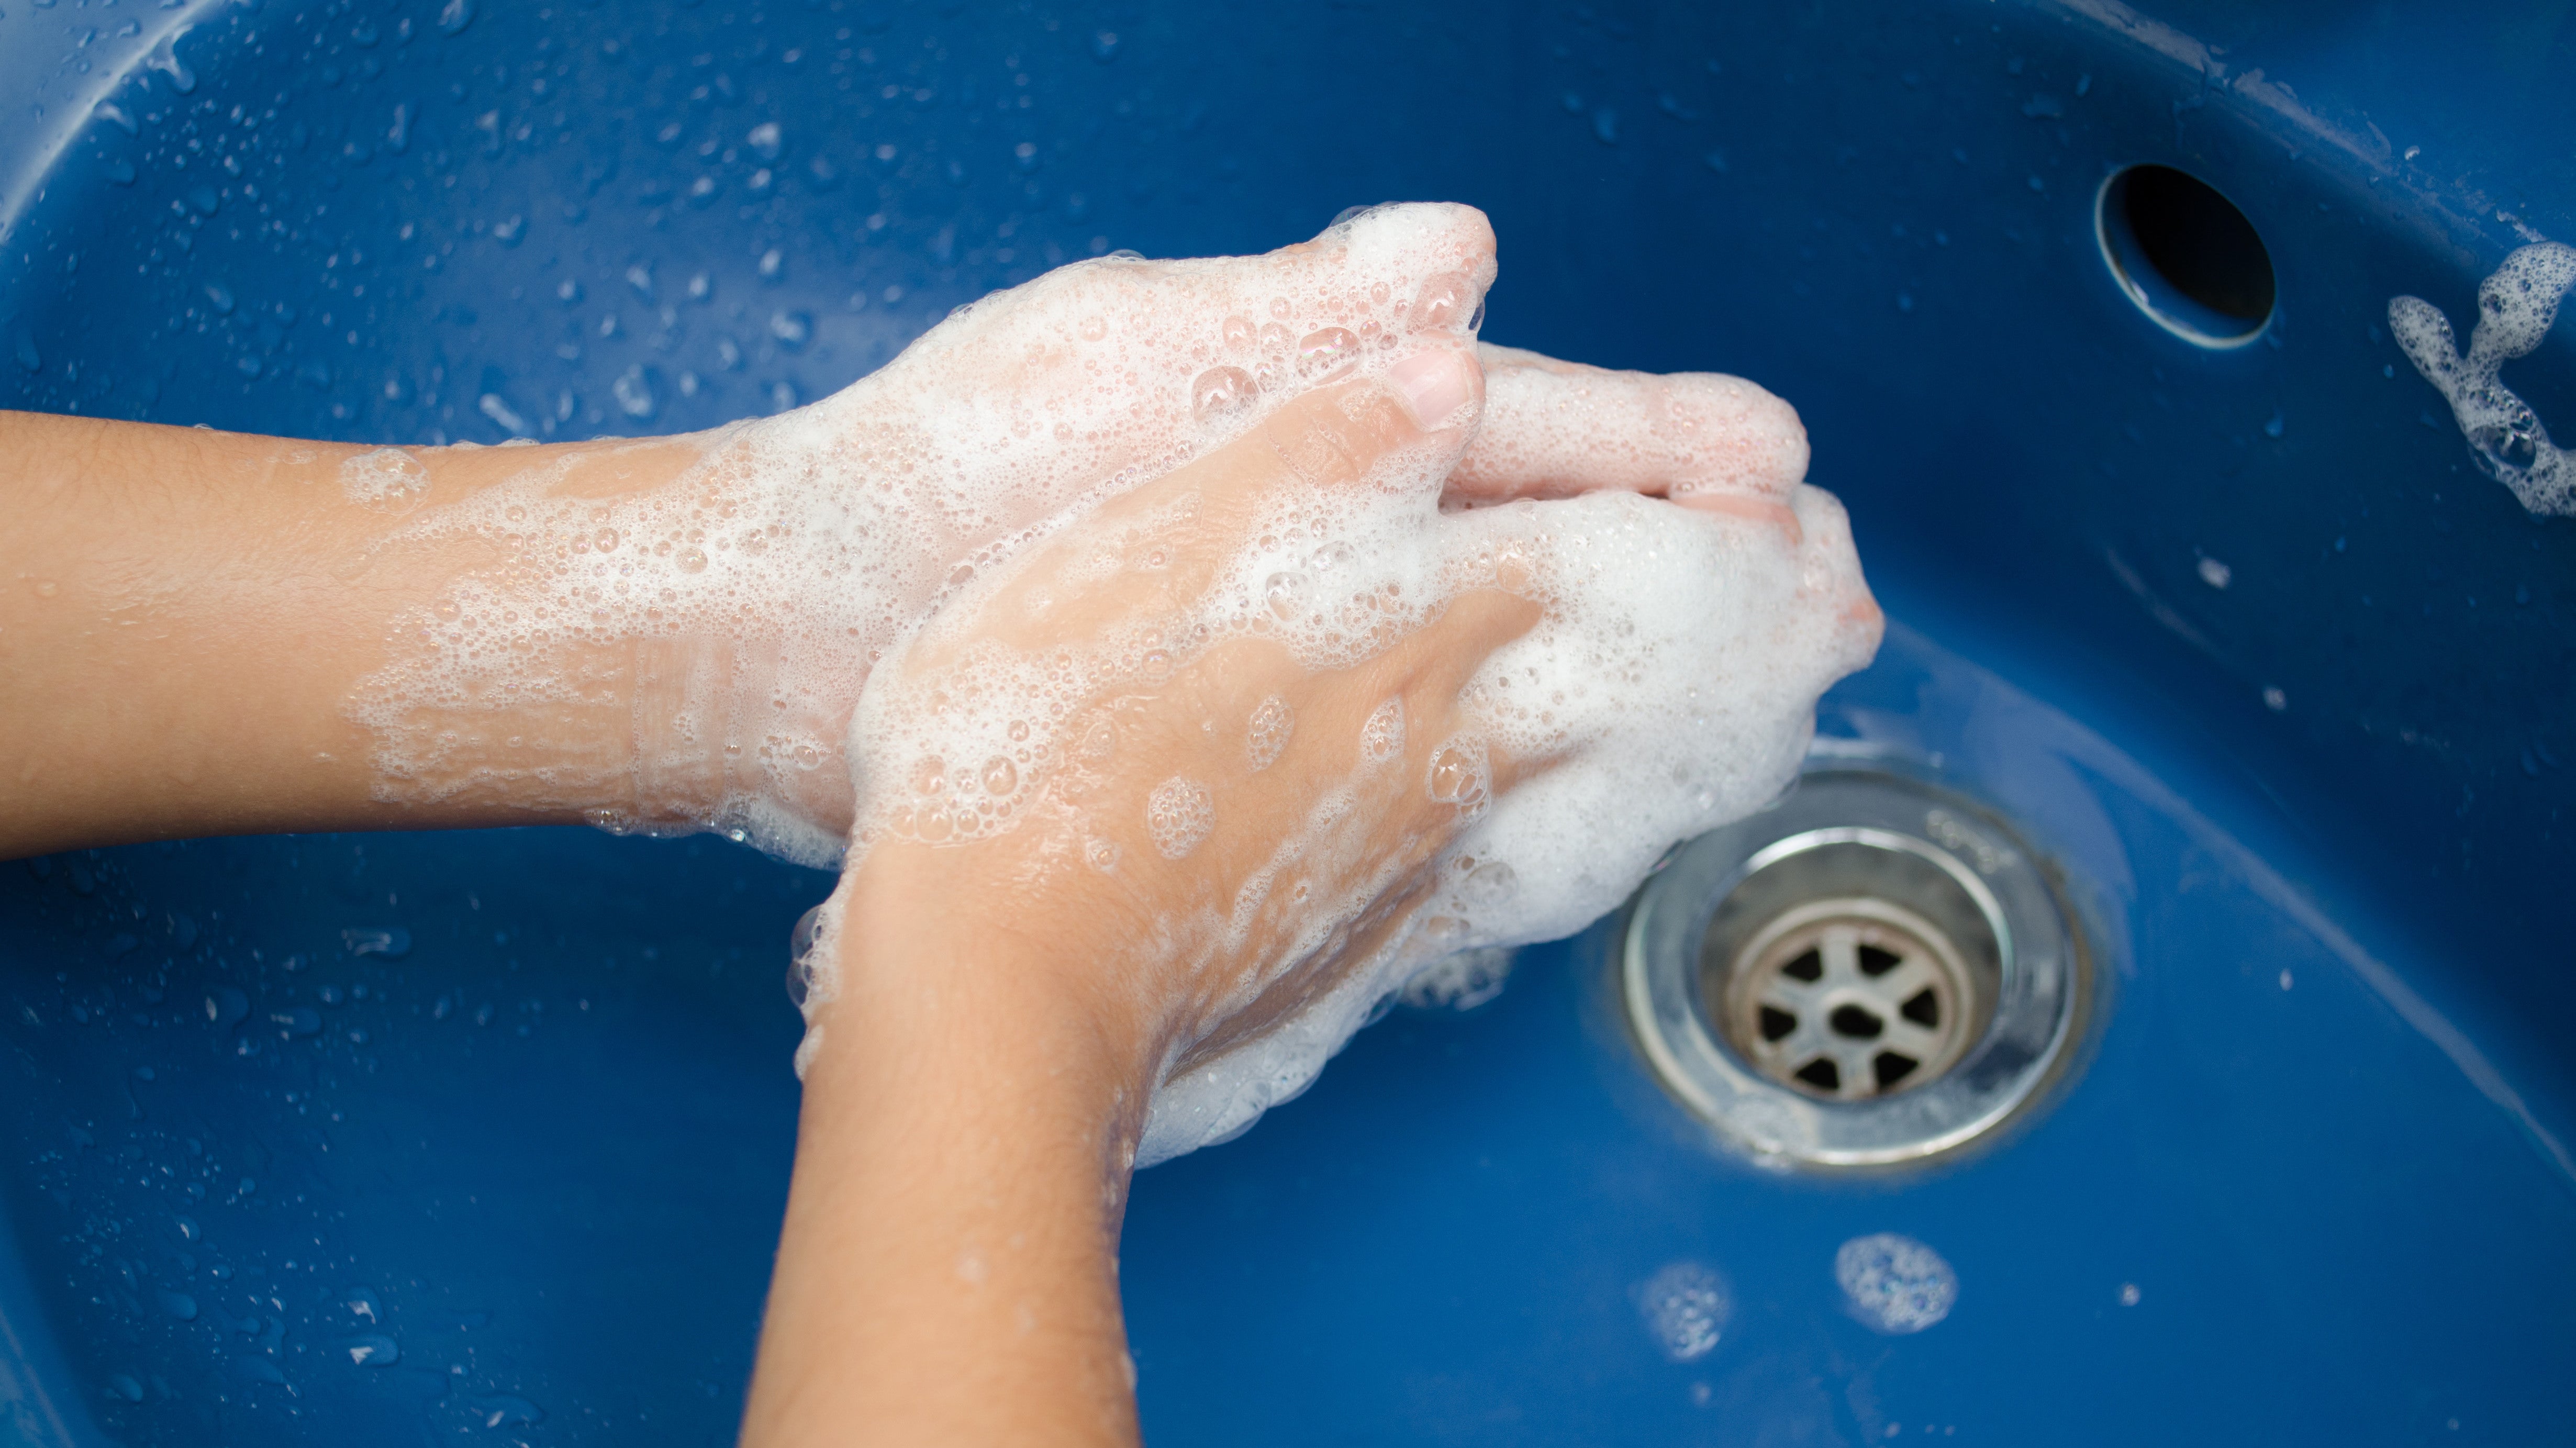 How To Actually Wash Germs Off Your Hands